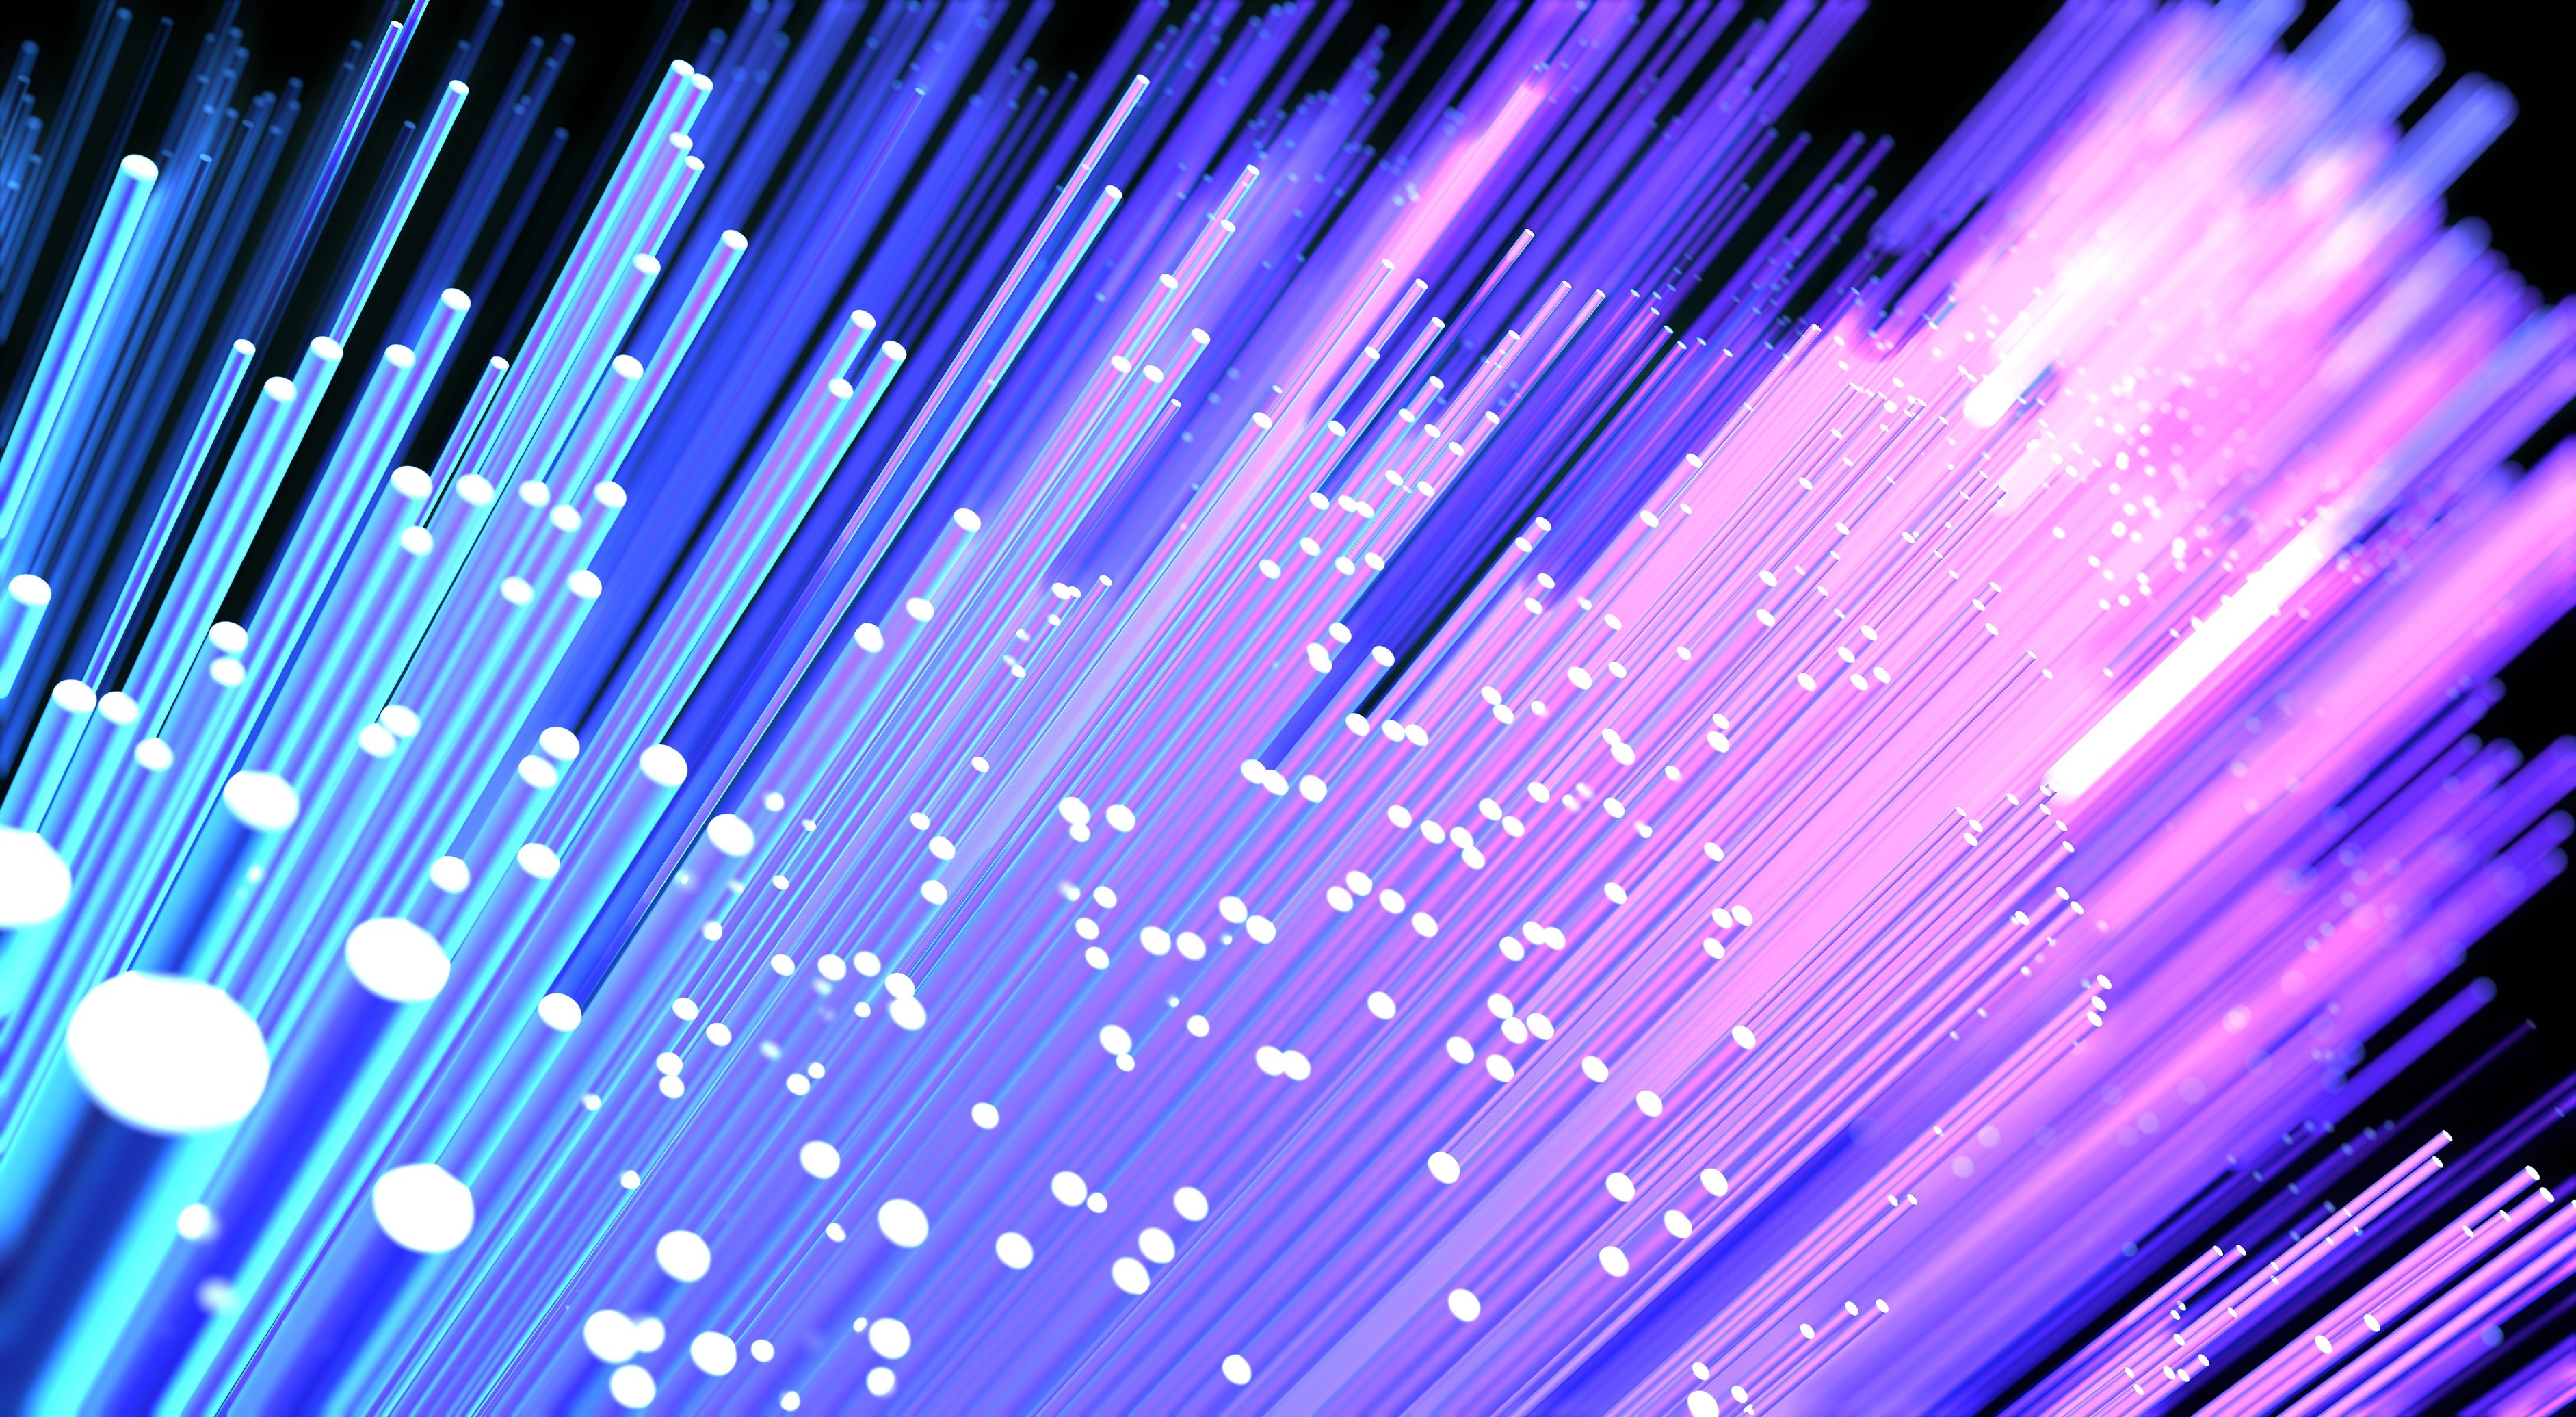 PRYSMIAN GROUP EXTENDS ITS PARTNERSHIP WITH OPENREACH TO SUPPORT FULL FIBRE BROADBAND PLAN
